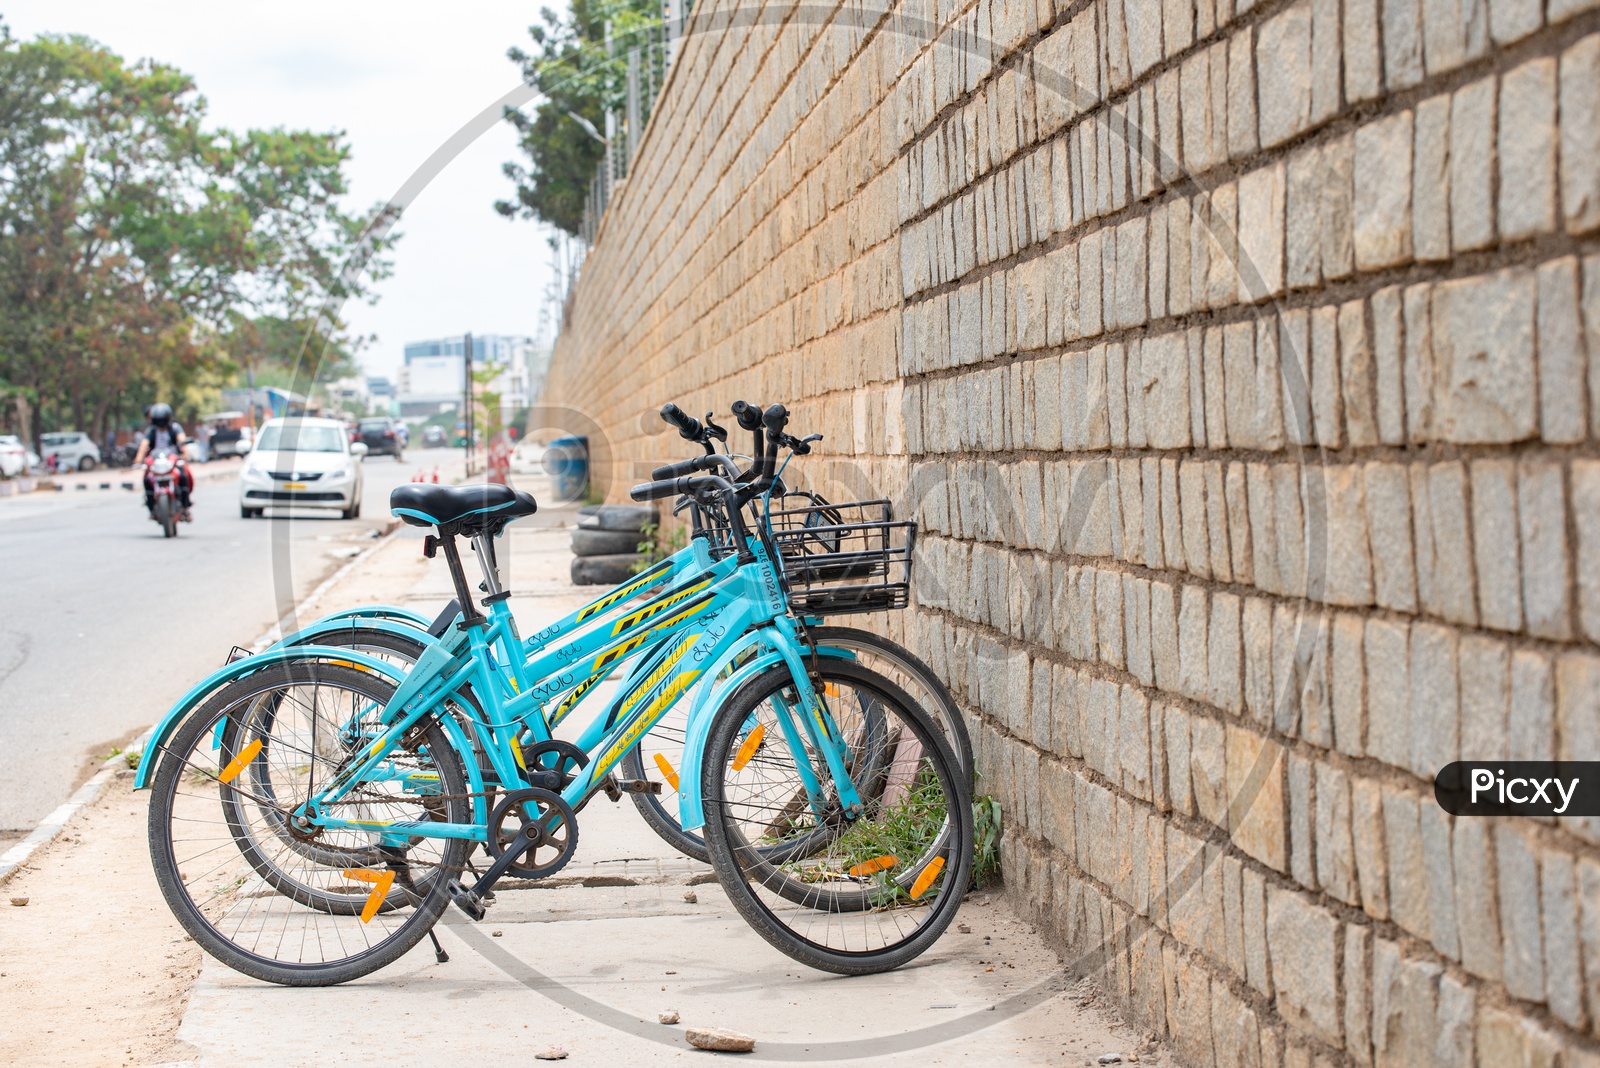 YULU  an Electric Cycle  An app Based Bicycle Rentals at a Hub